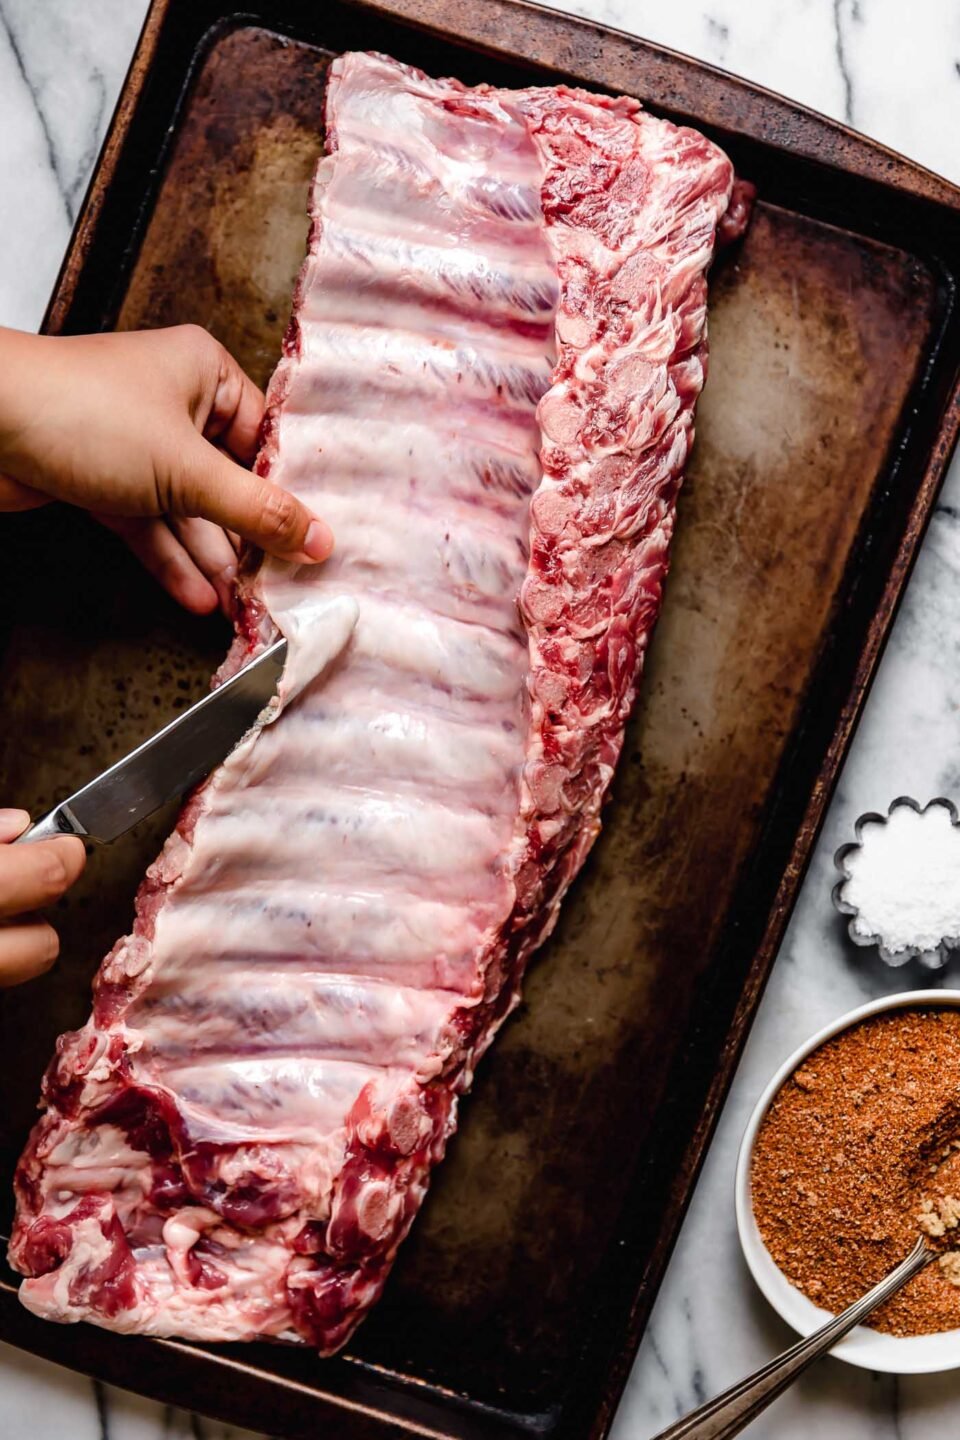 An overhead shot of raw baby back ribs on a sheet pan atop a white marbled surface, with a woman's hand holding a knife & removing the silverback membrane from the ribs. A small dish of dry rub and a small dish of salt sit alongside the pan.